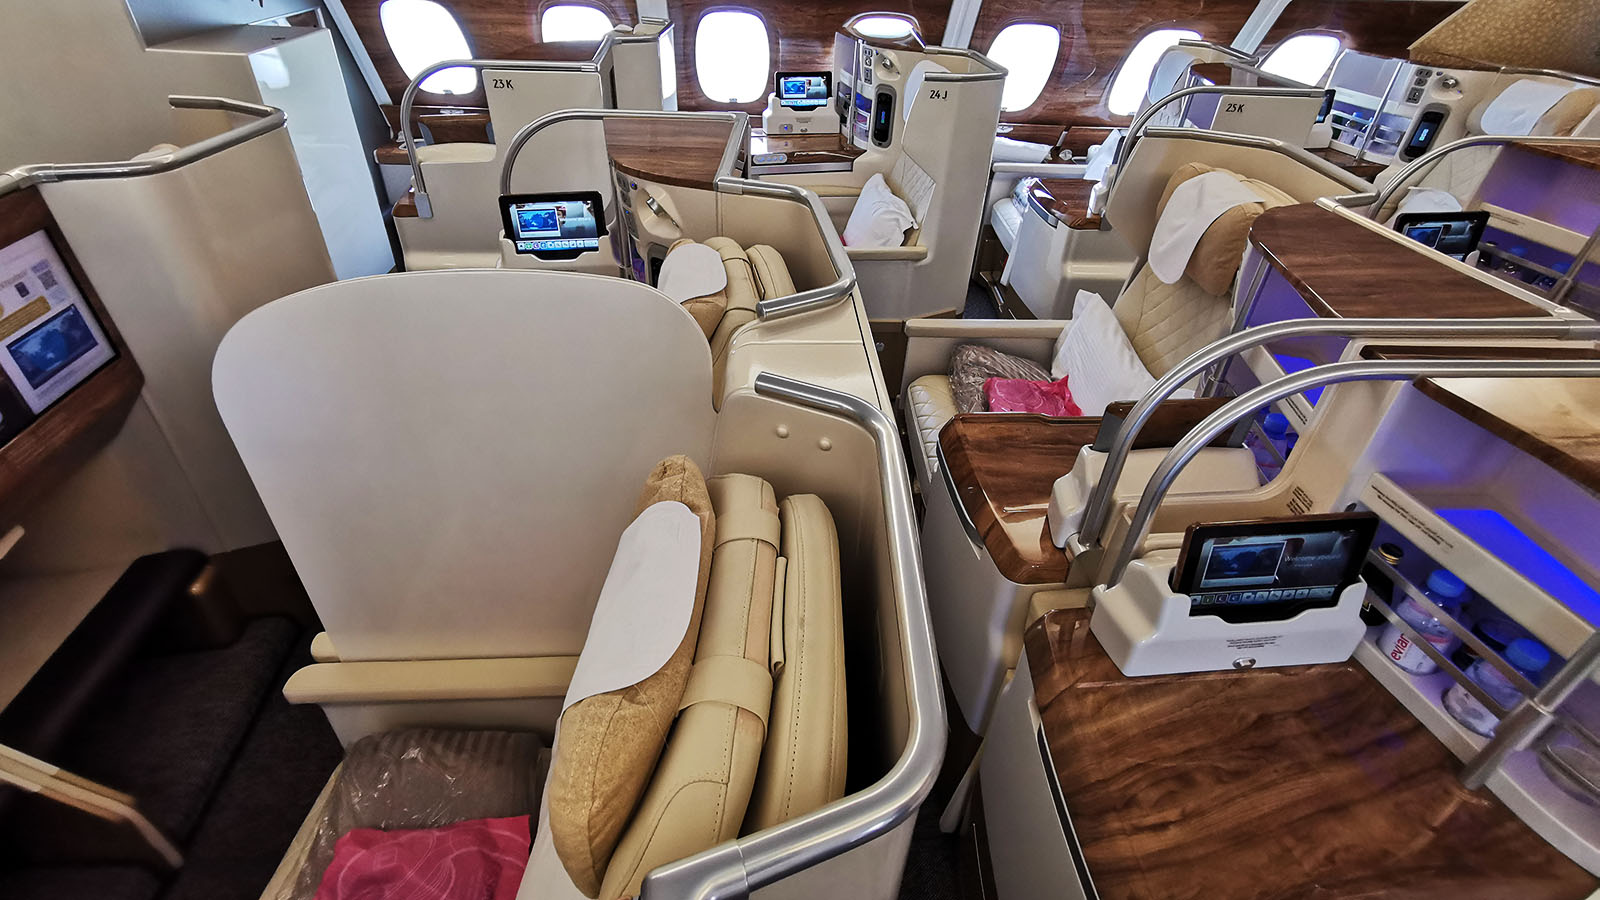 Centre seats in Emirates Airbus A380 Business Class